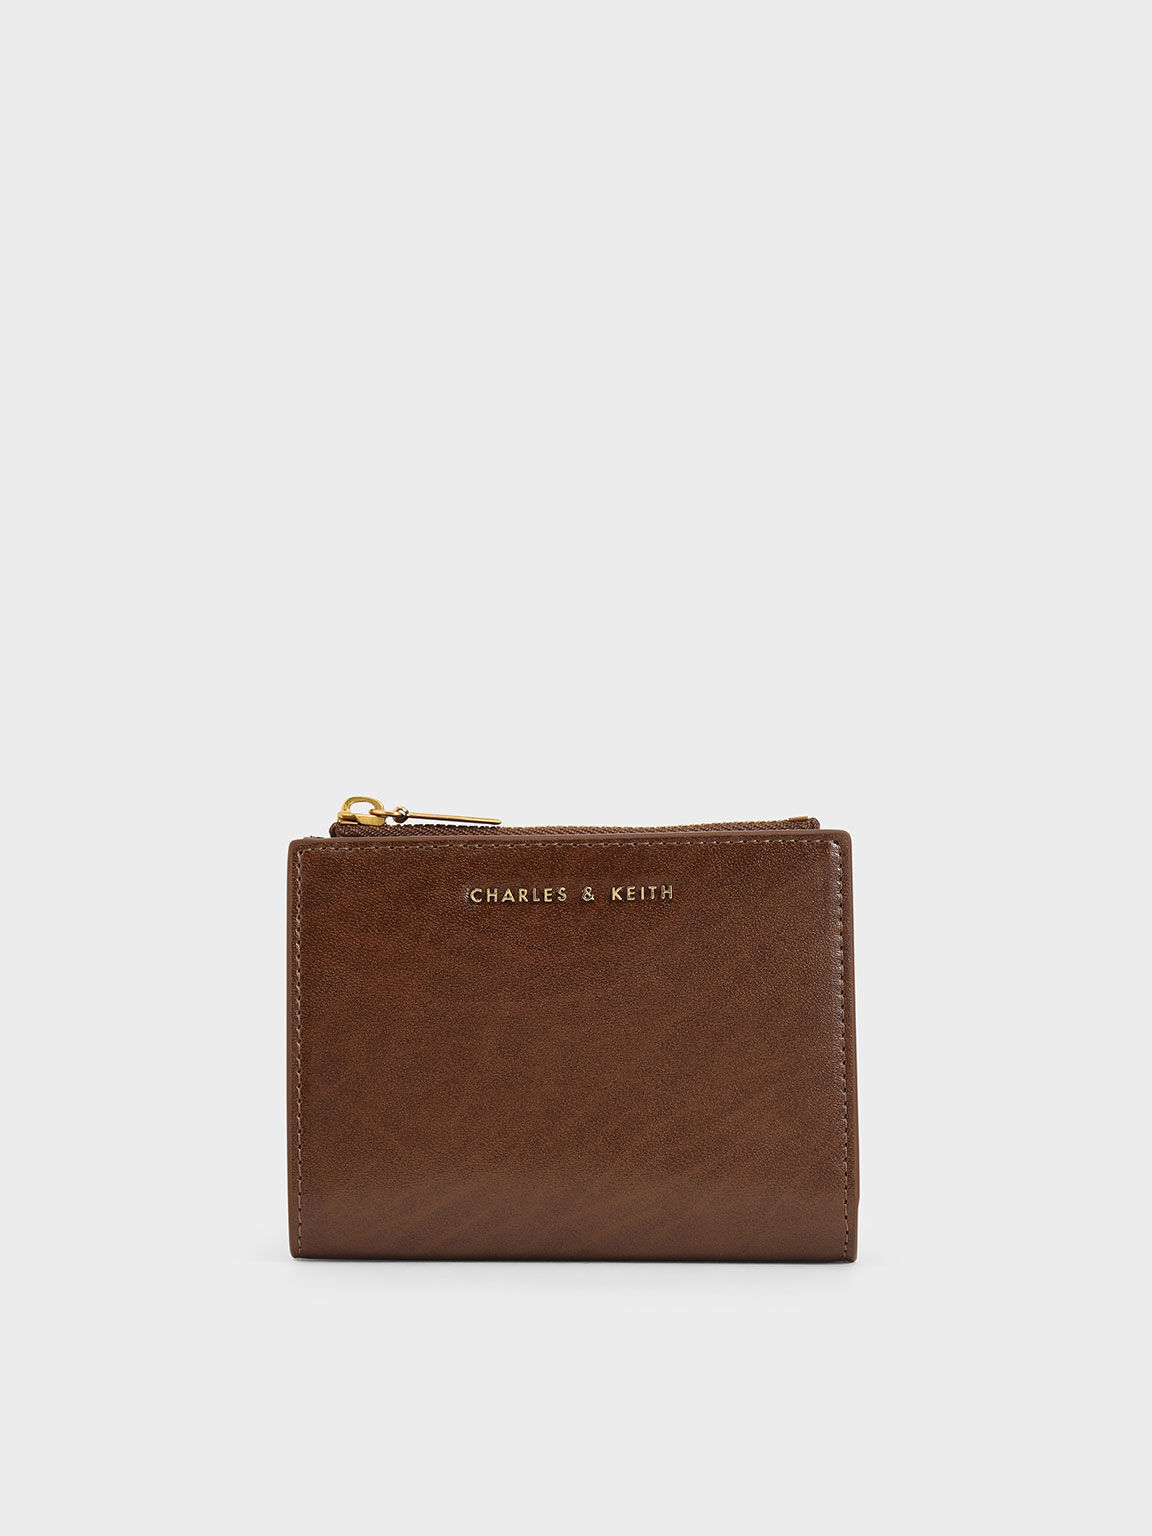 Women's Wallets | Shop Exclusive Styles | CHARLES & KEITH SG